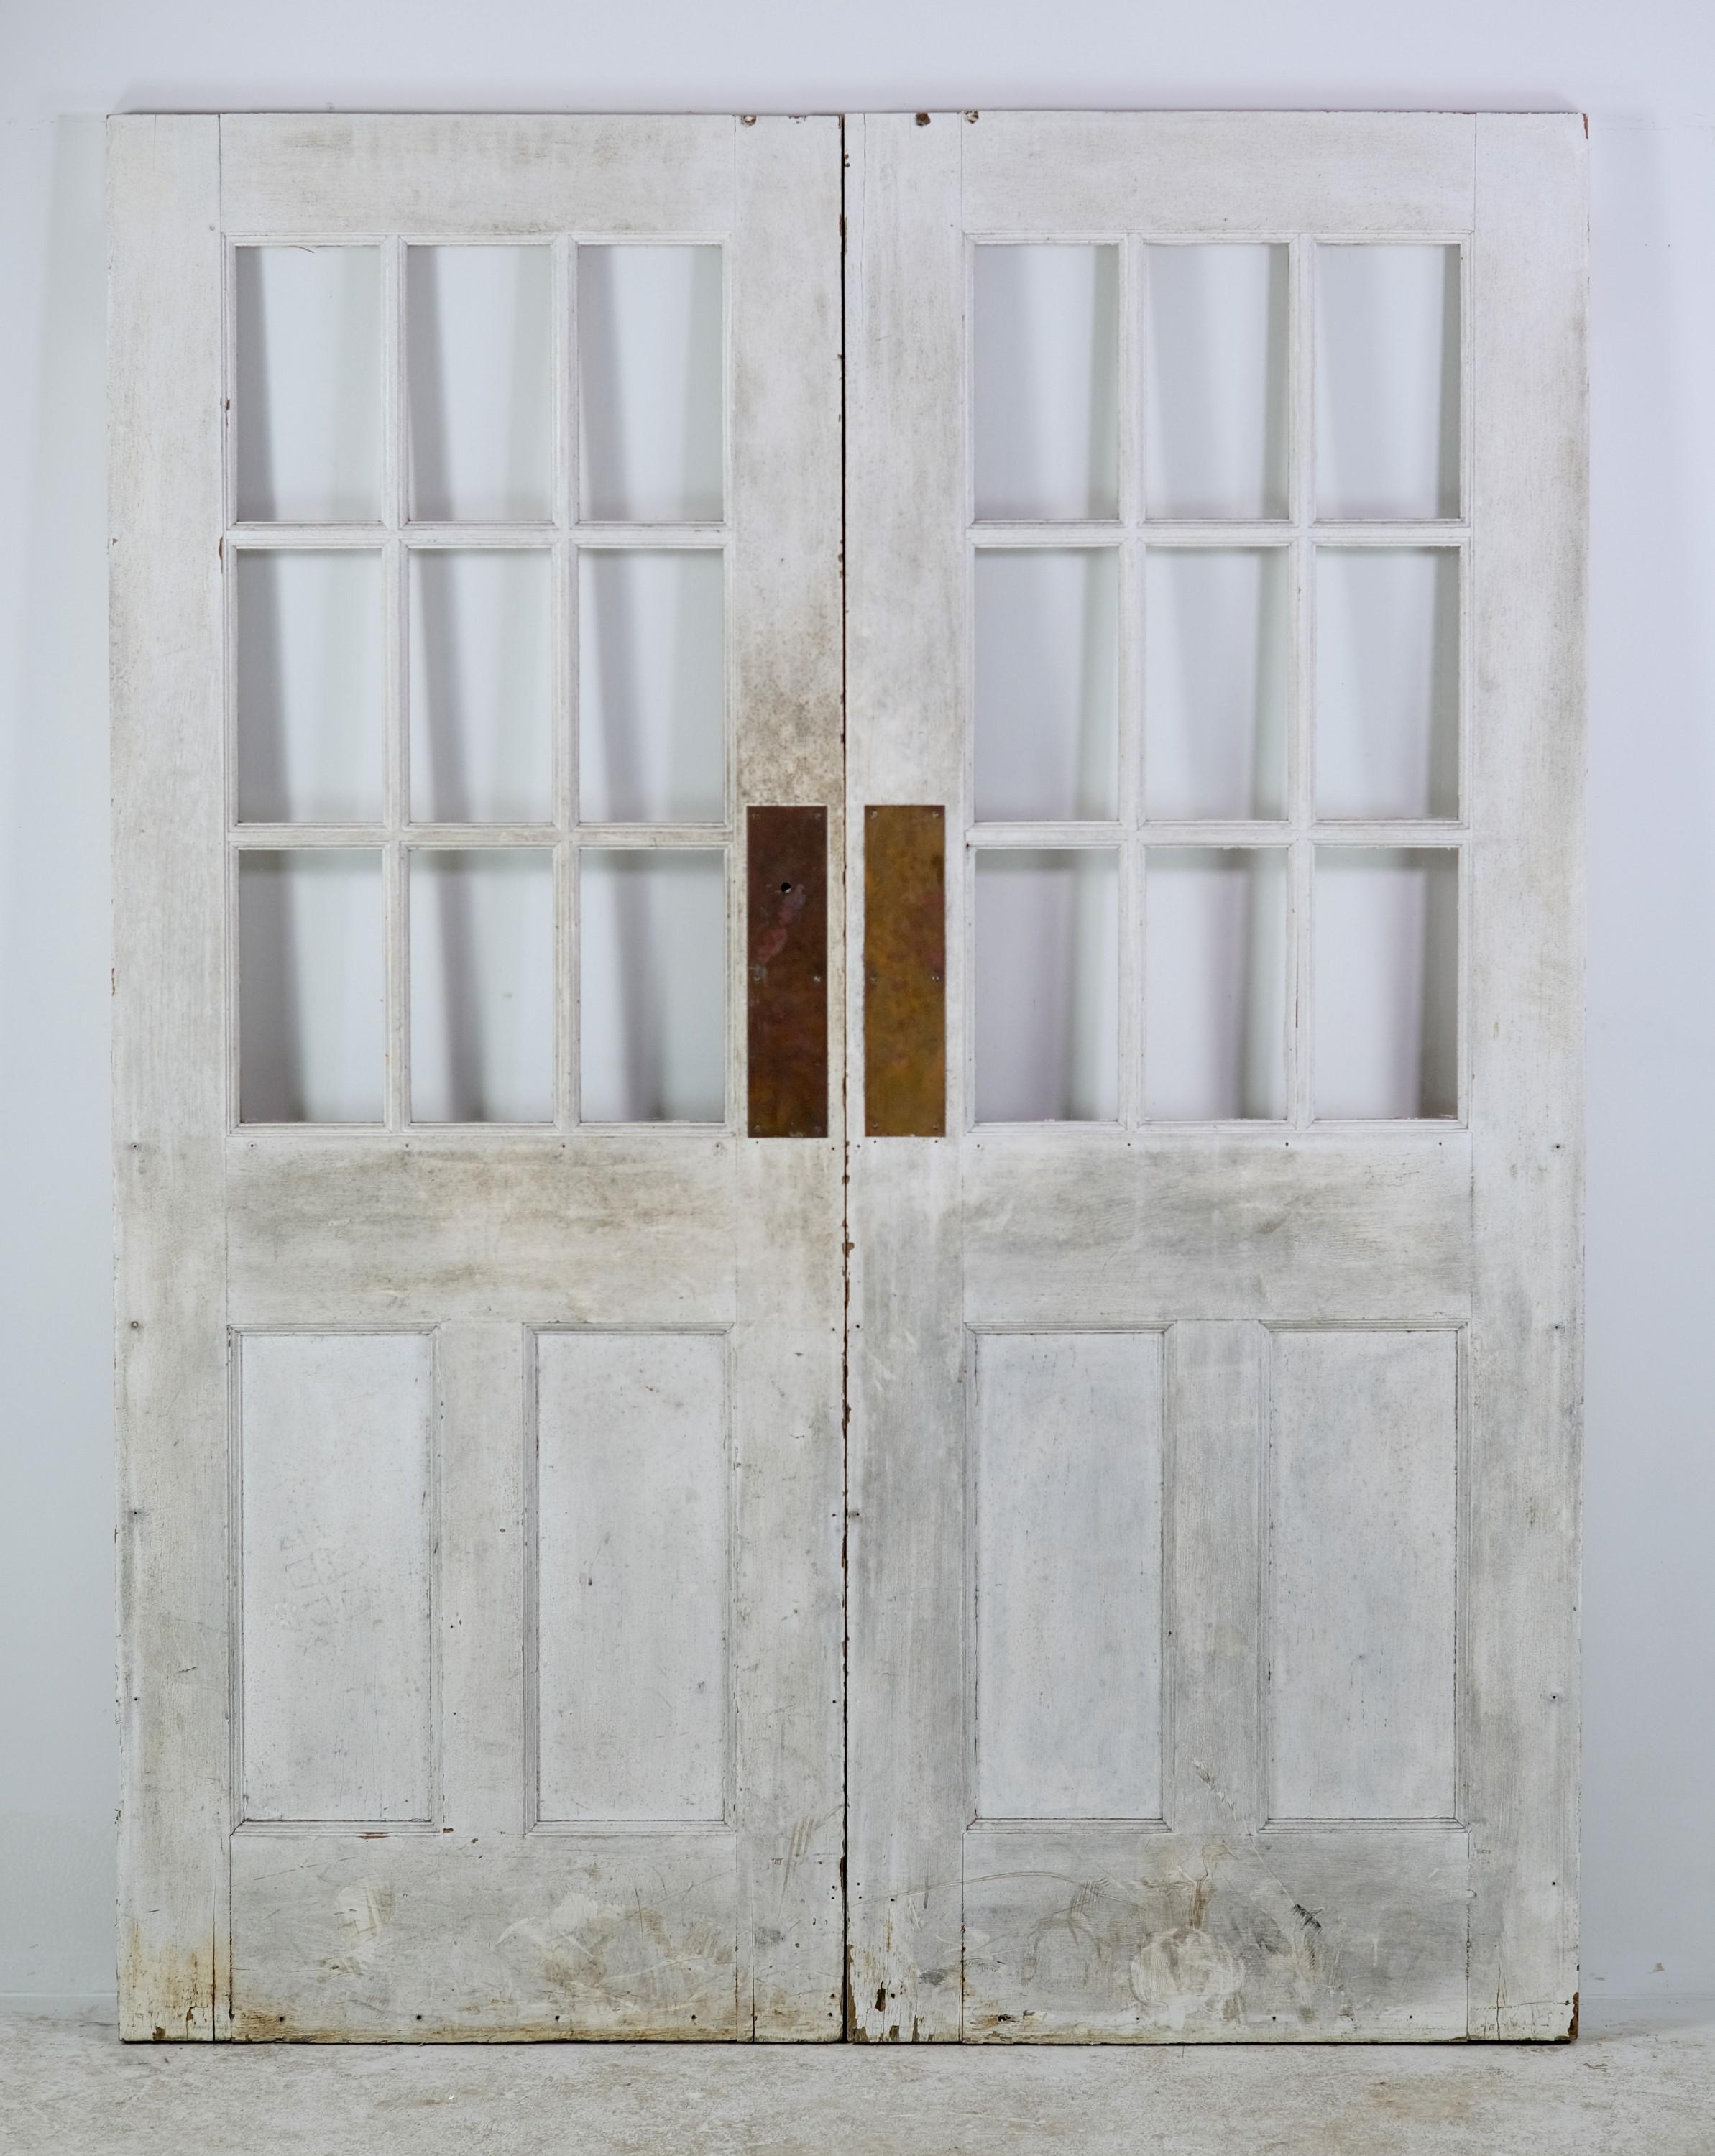 Set of antique commercial oak doors with nine glass lites and two vertical wood panes at the bottom. They come complete with original brass door pulls. One side is painted beige and the other side painted white. Priced as a double. This can be seen